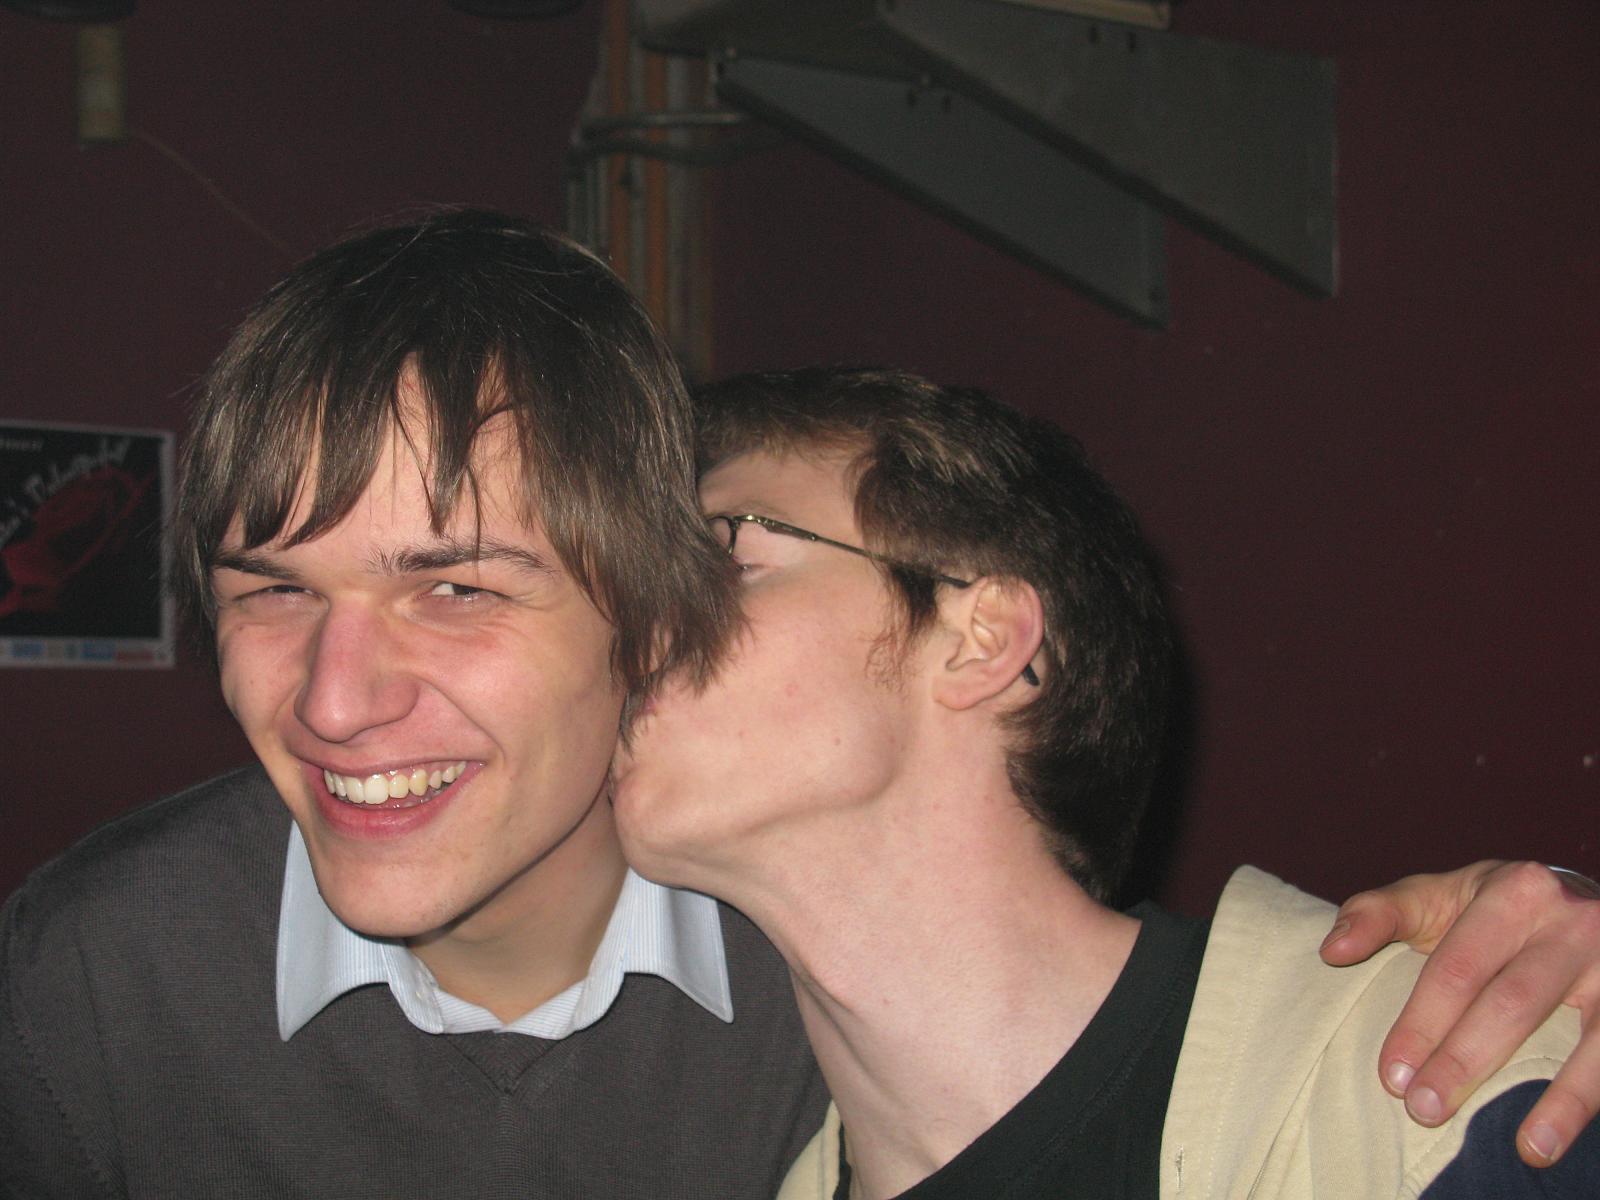 two boys kissing and smiling together with one of them looking at the camera